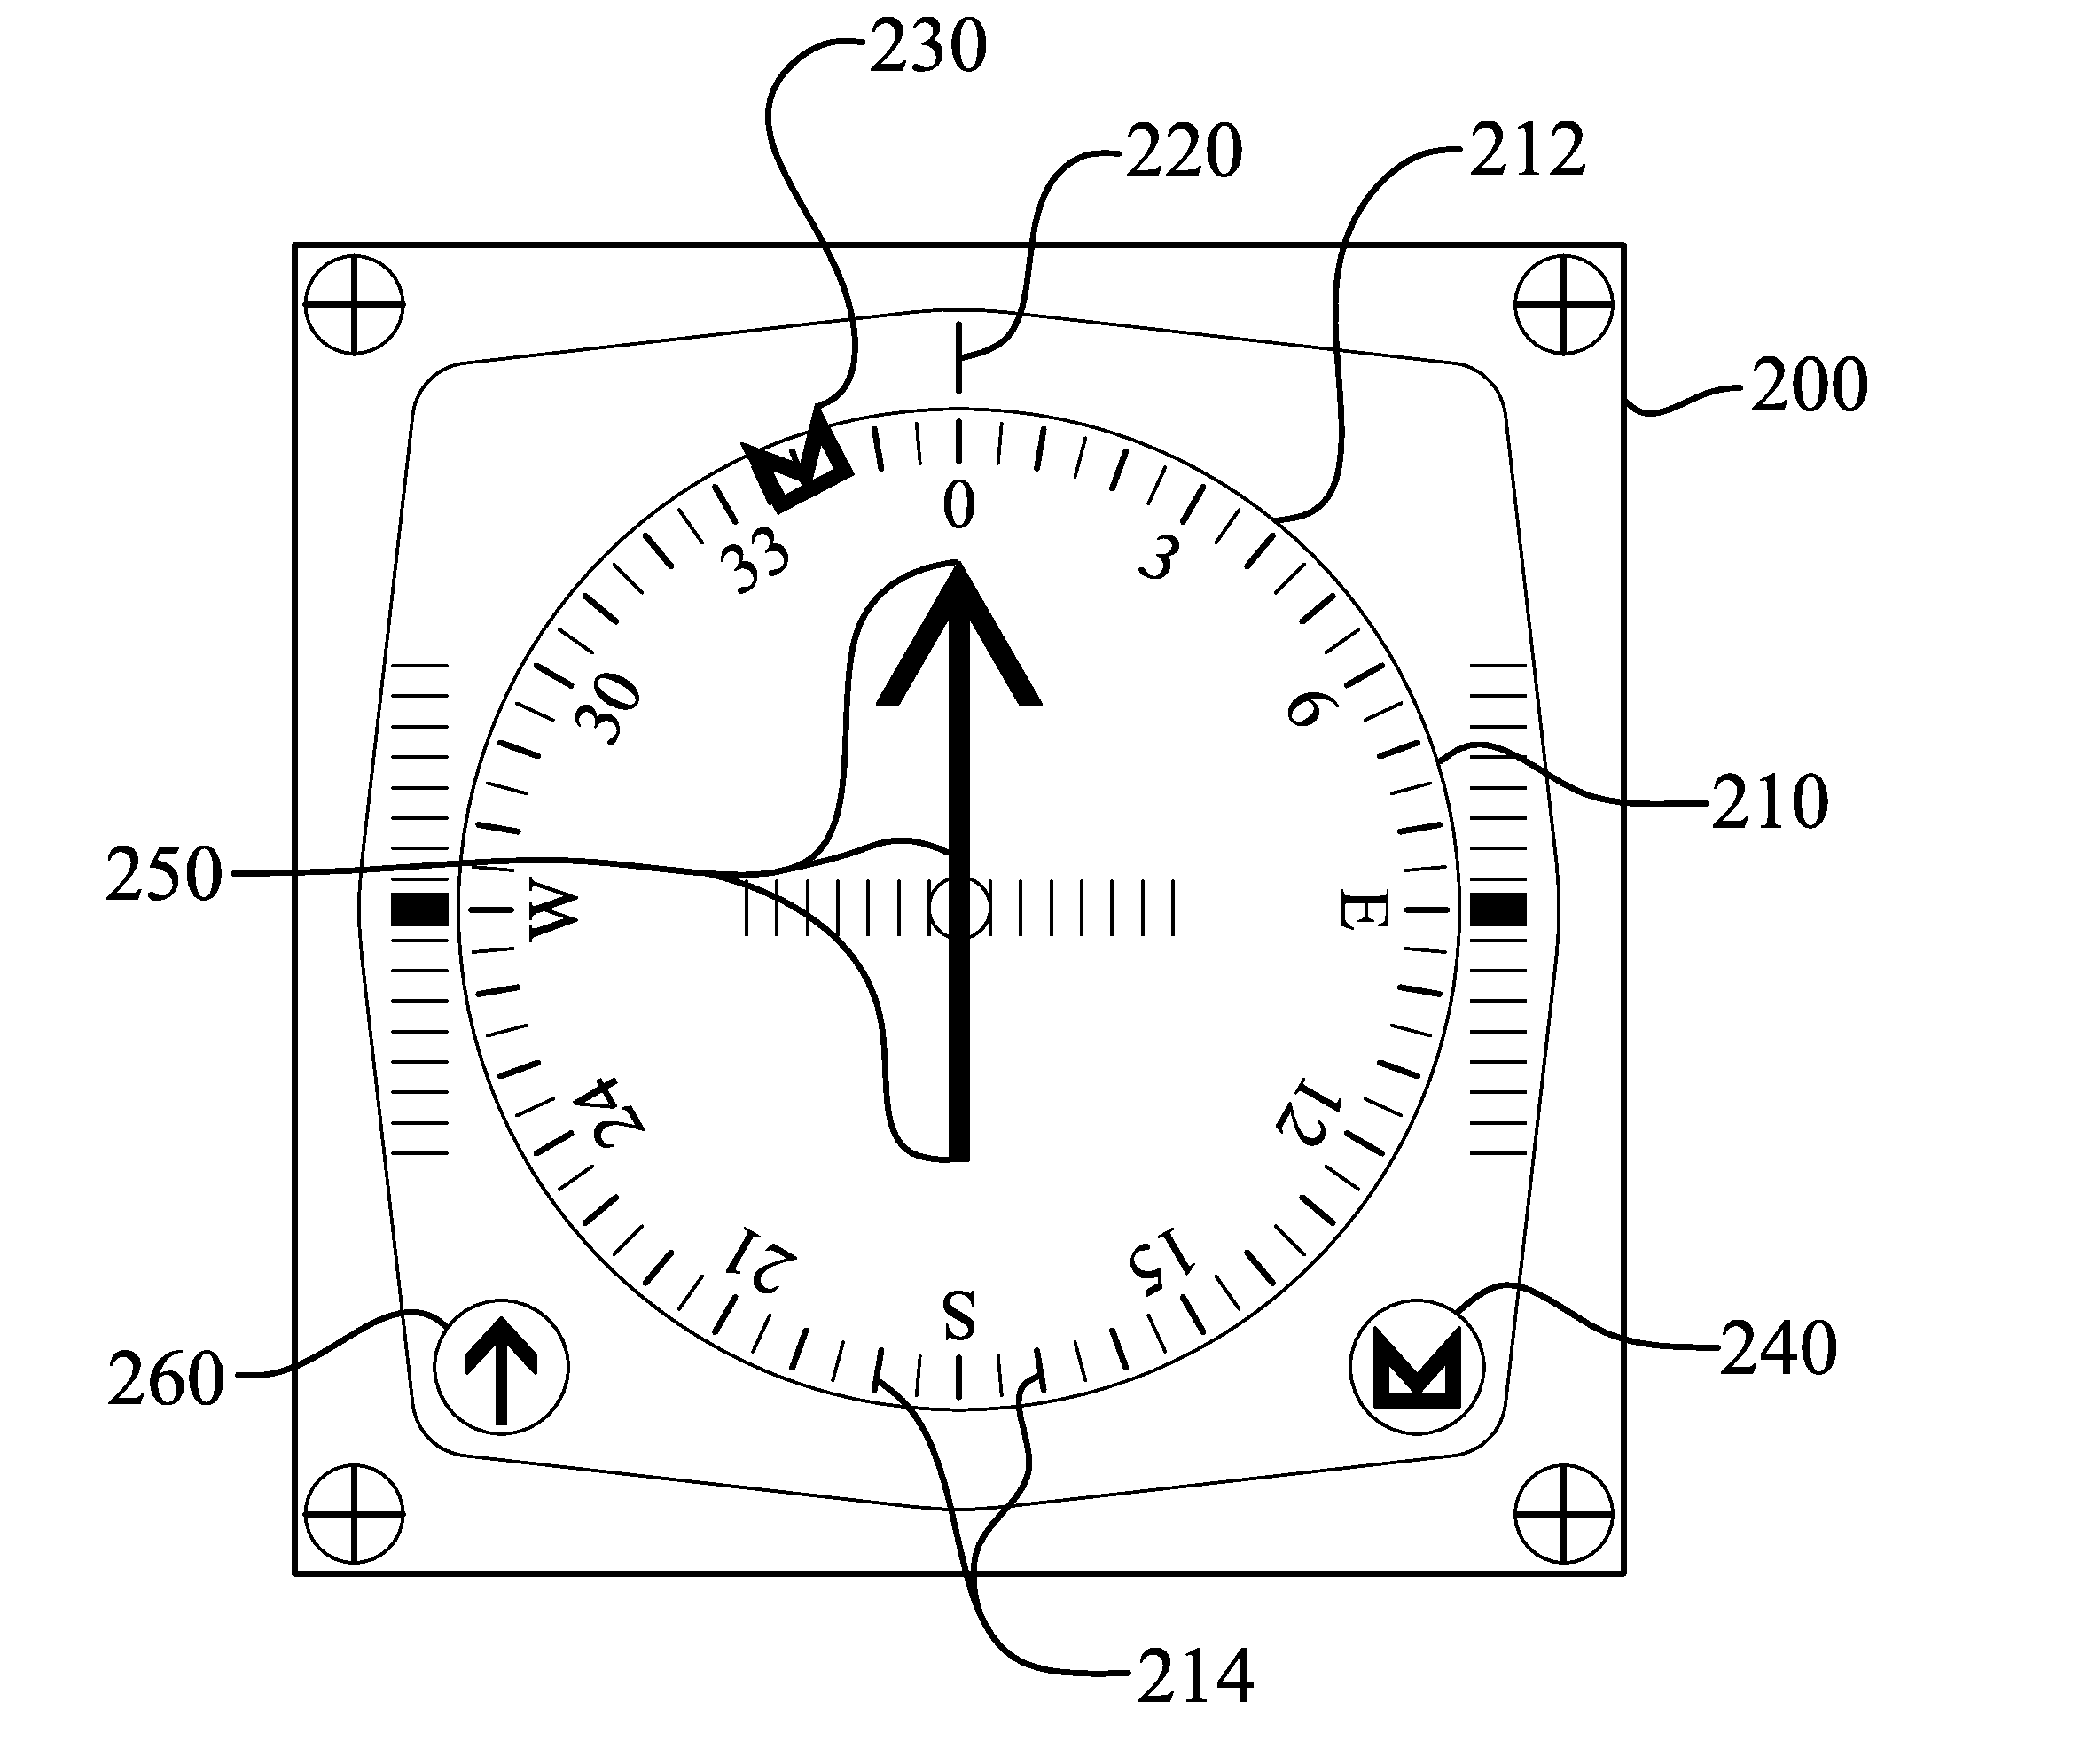 Aviation yoke hsi interface and flight deck control indicator and selector safety system